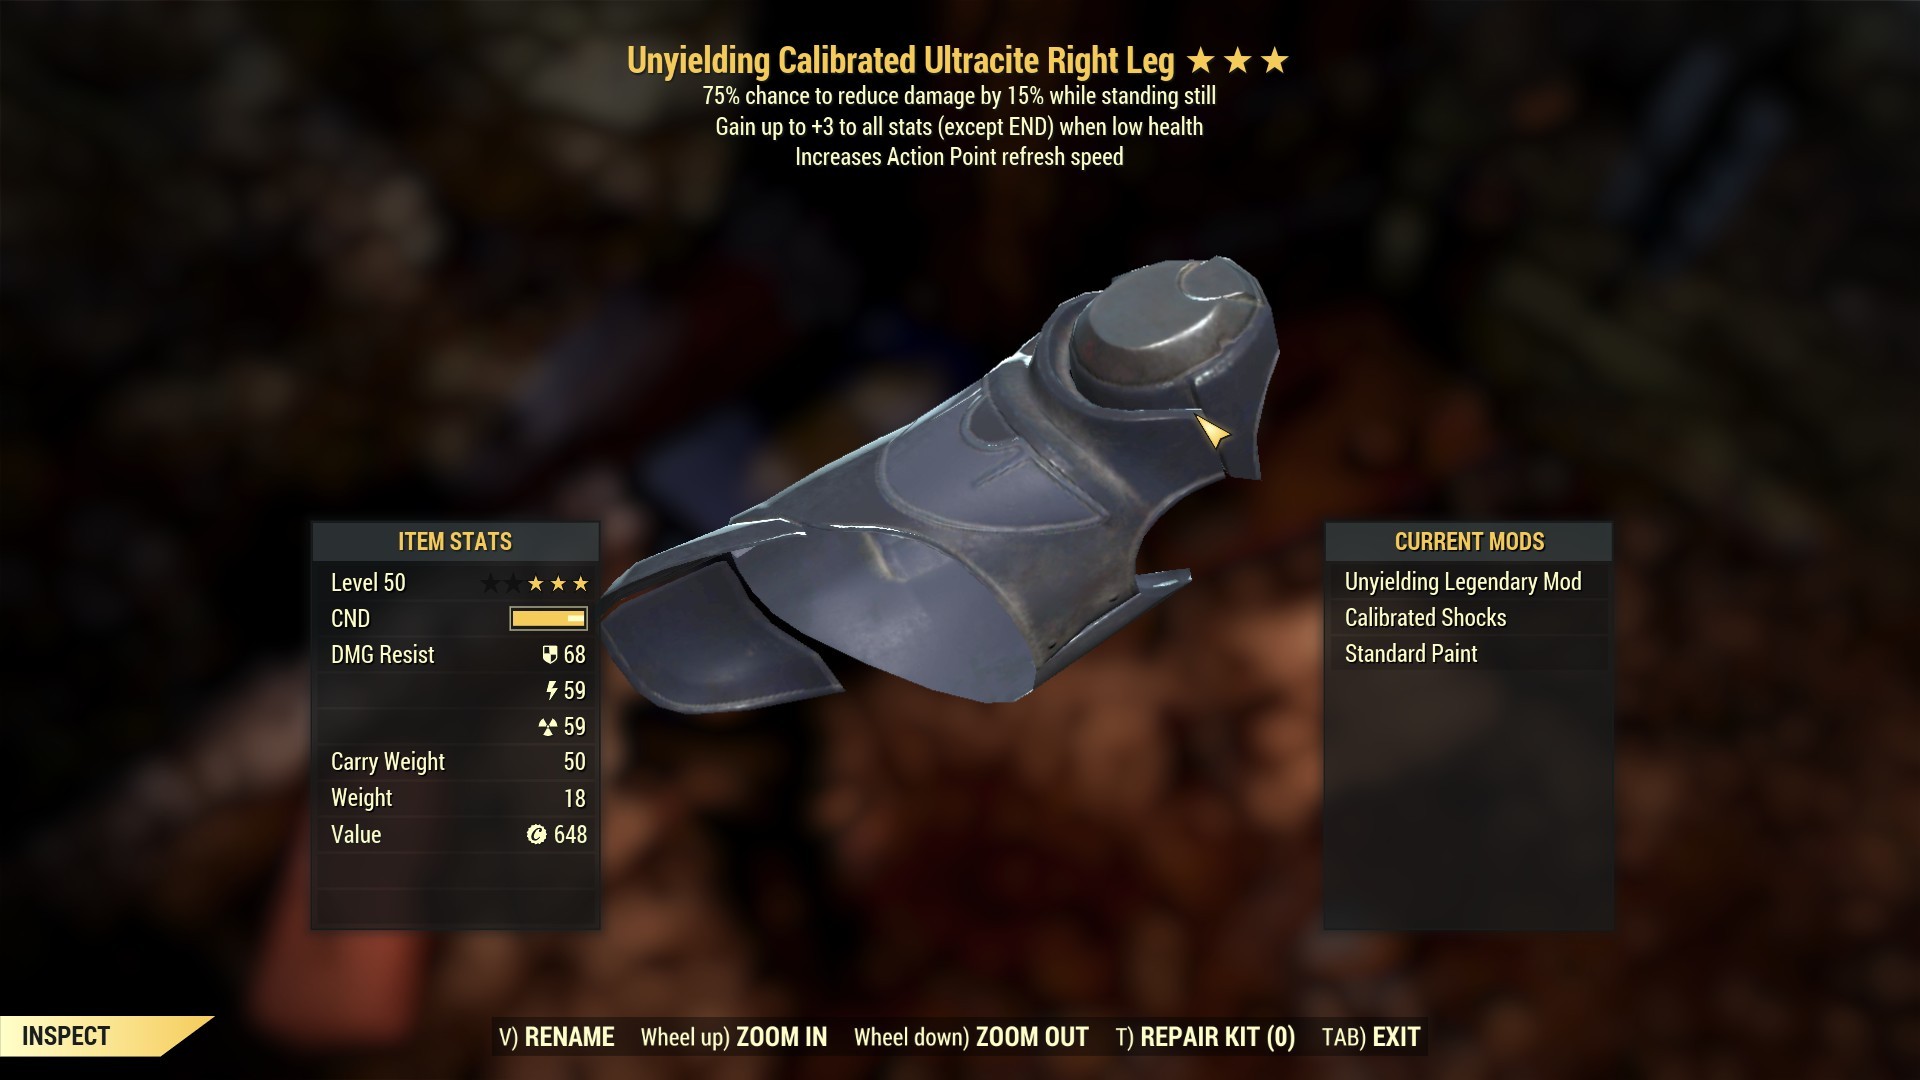 Unyielding [Sent AP] Calibrated Ultracite Right Leg